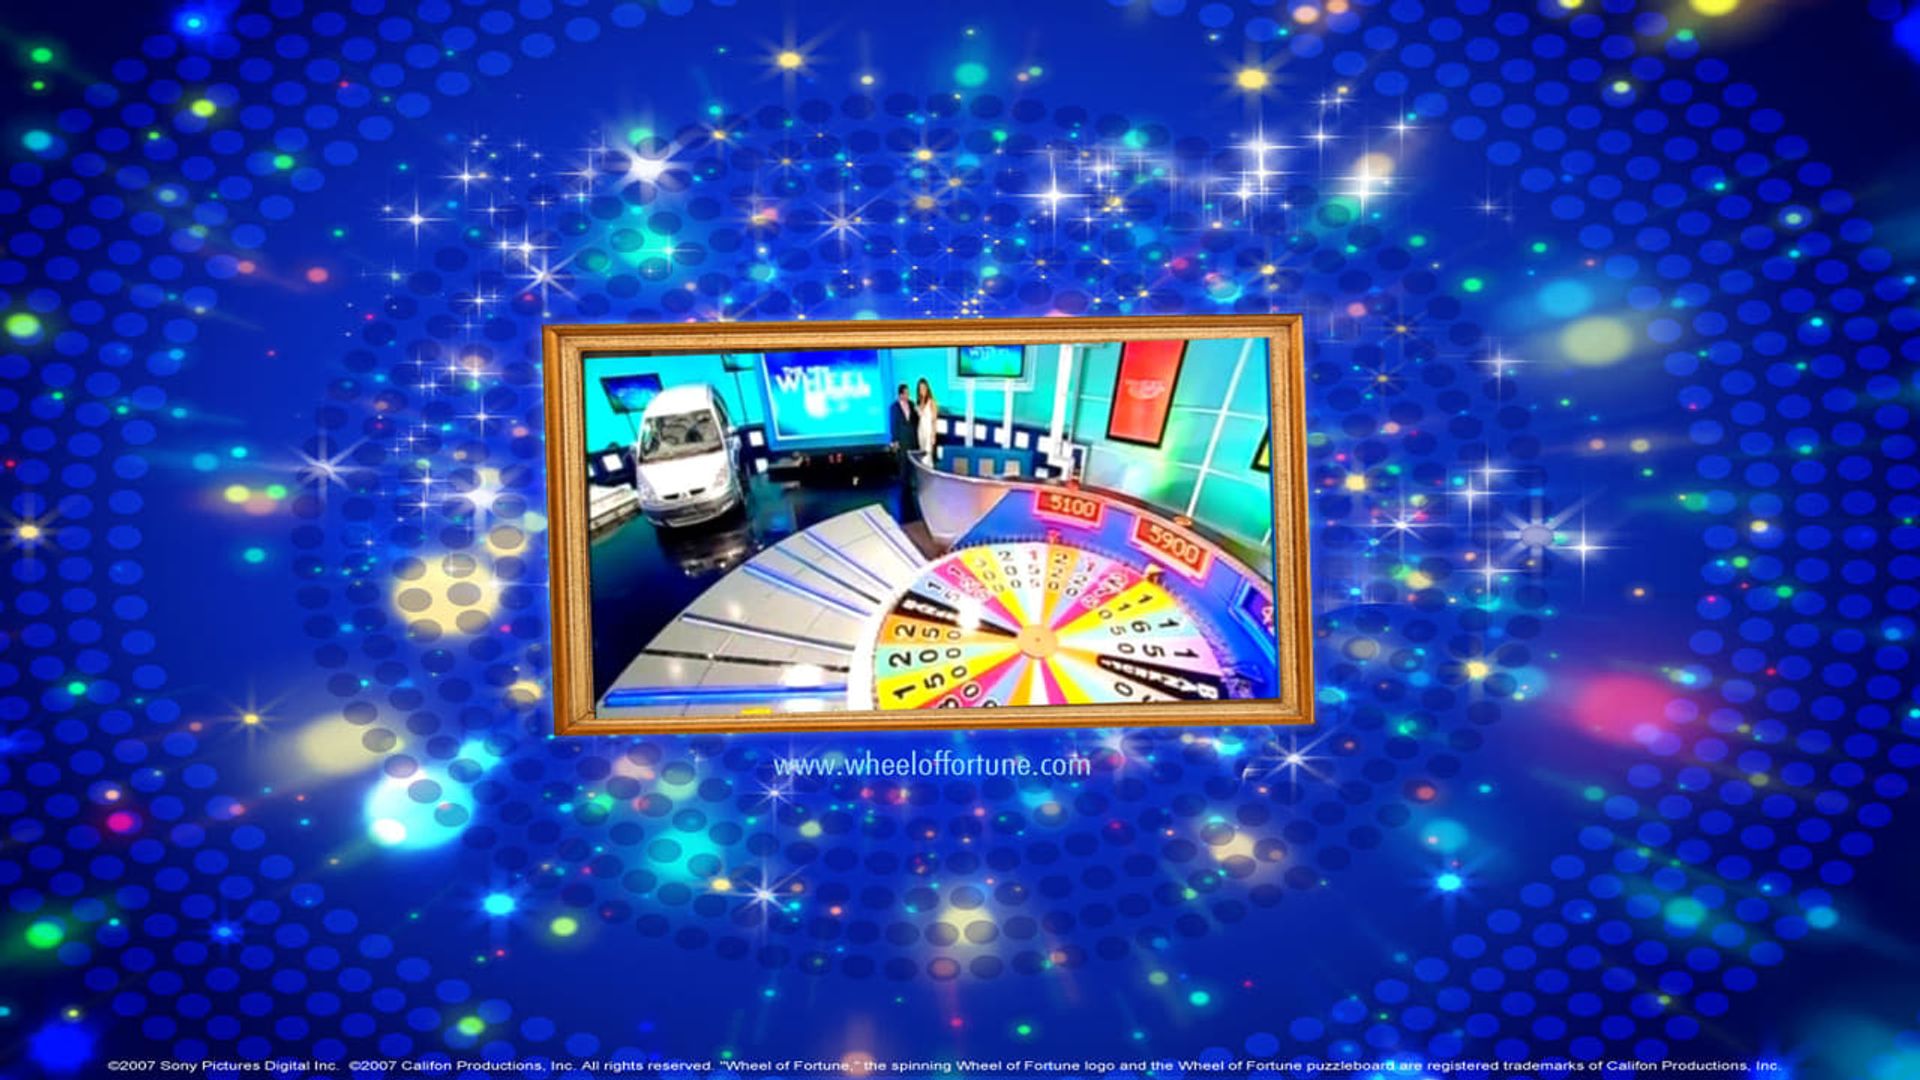 Wheel of Fortune background